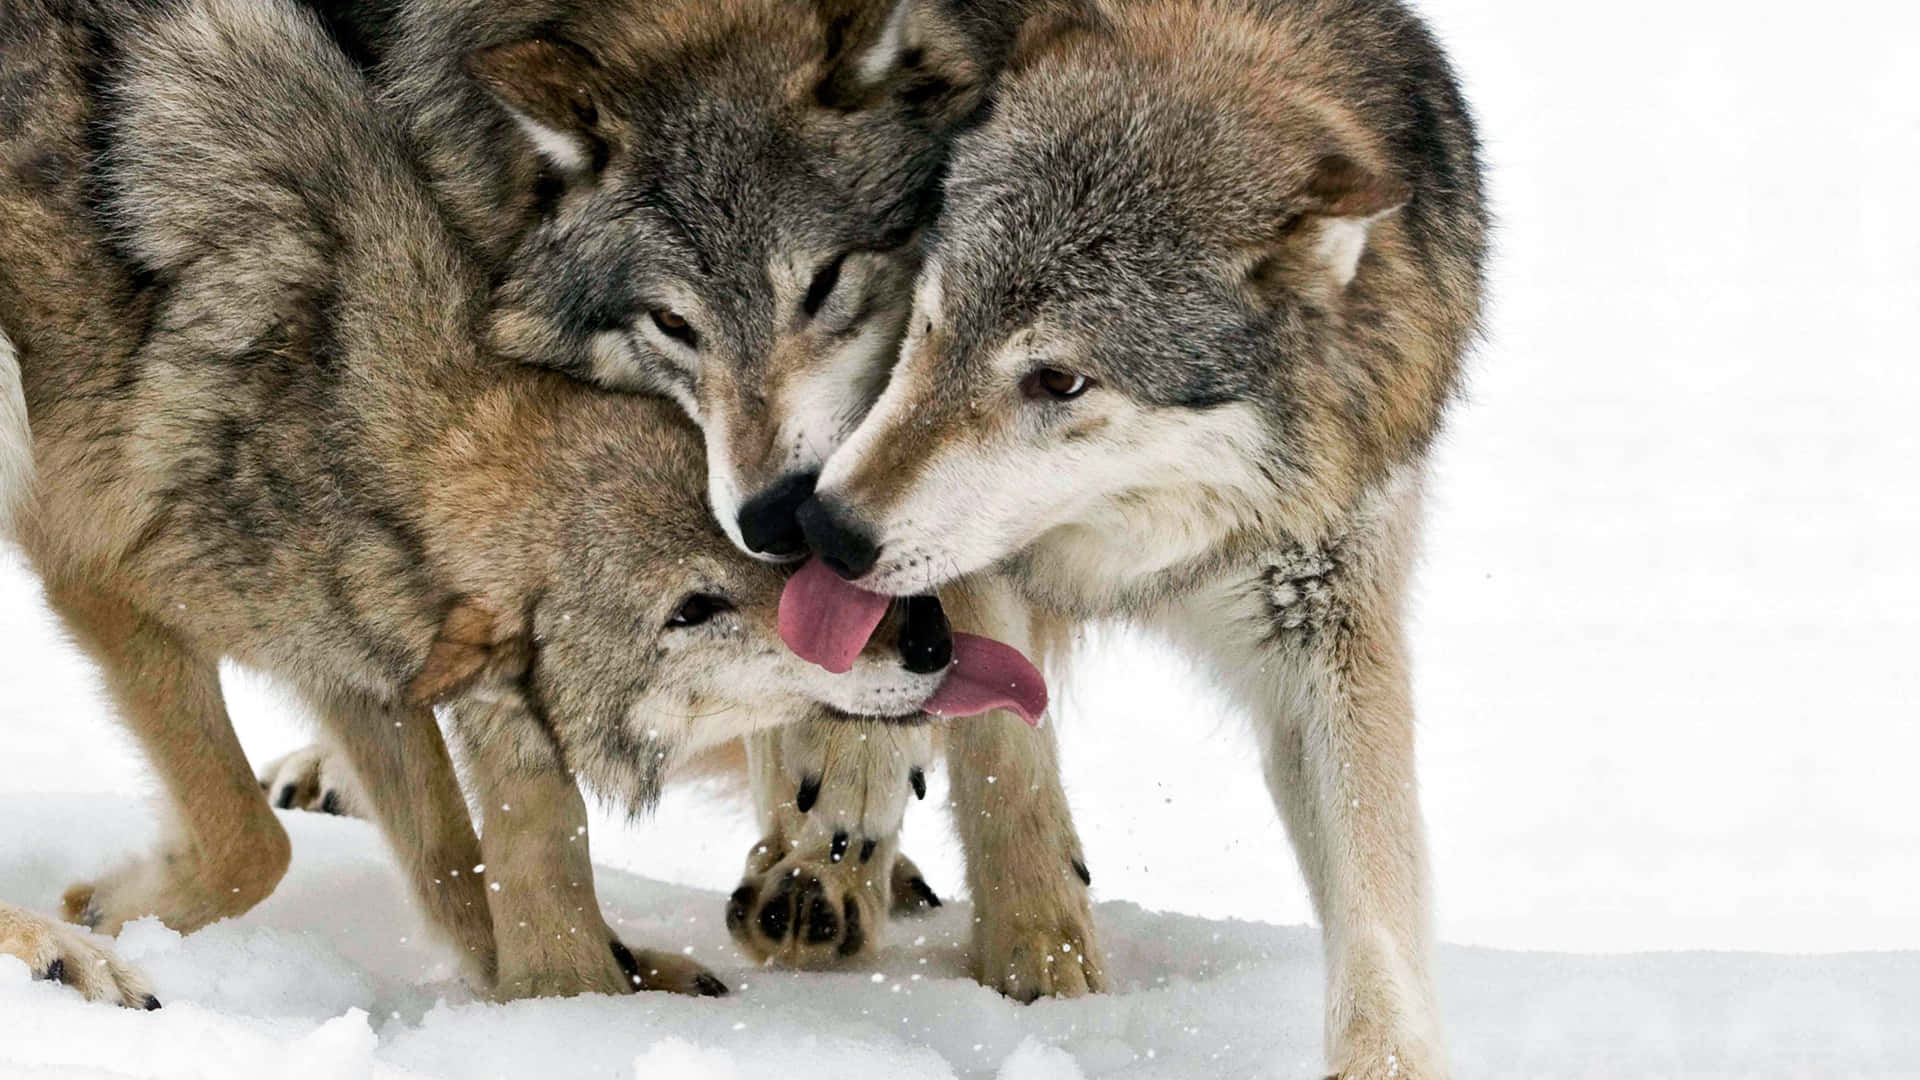 A pair of cute, loving wolves enjoying an intimate moment Wallpaper